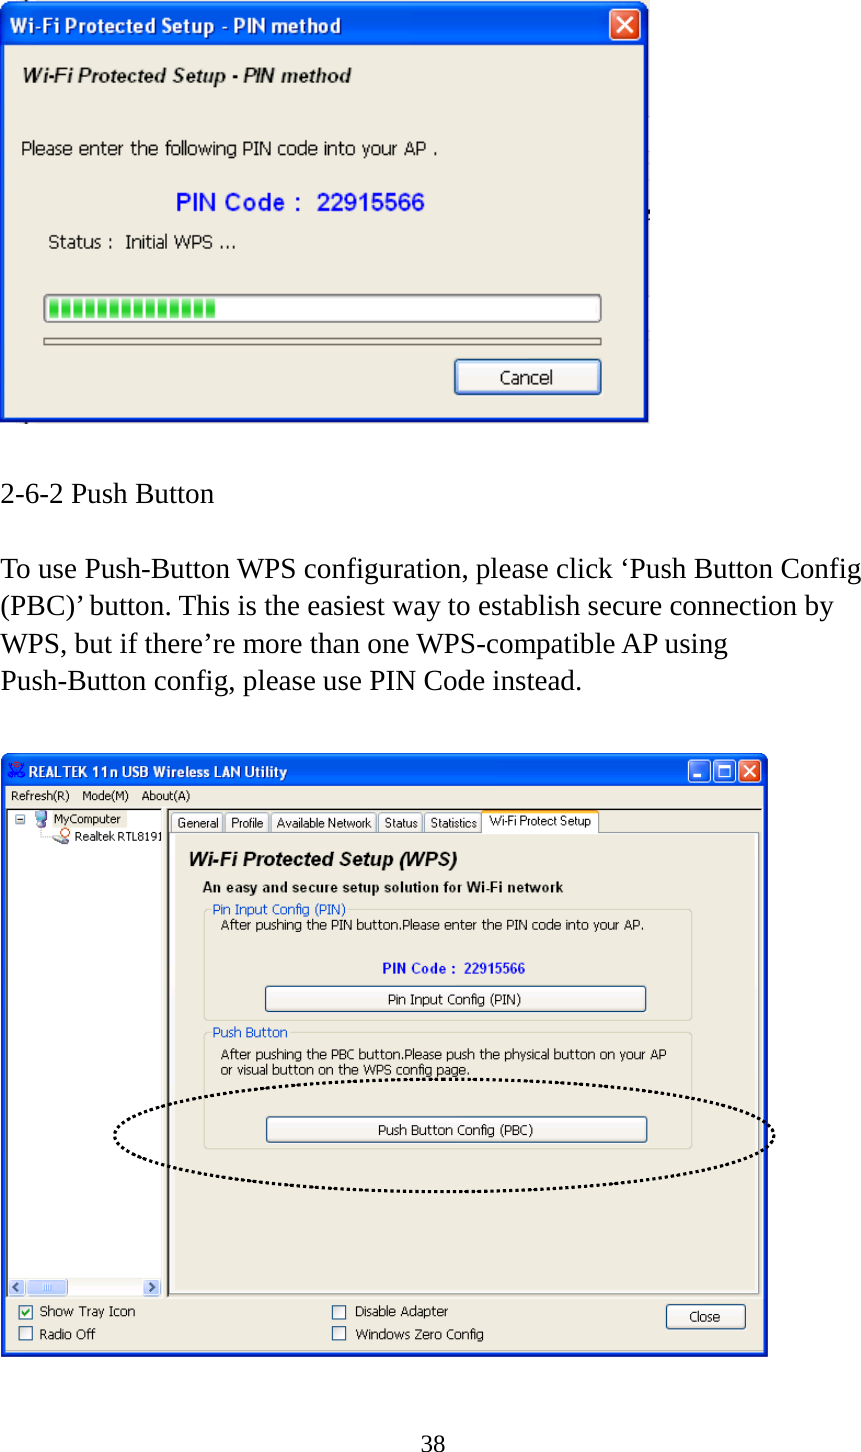 38    2-6-2 Push Button  To use Push-Button WPS configuration, please click ‘Push Button Config (PBC)’ button. This is the easiest way to establish secure connection by WPS, but if there’re more than one WPS-compatible AP using Push-Button config, please use PIN Code instead.    